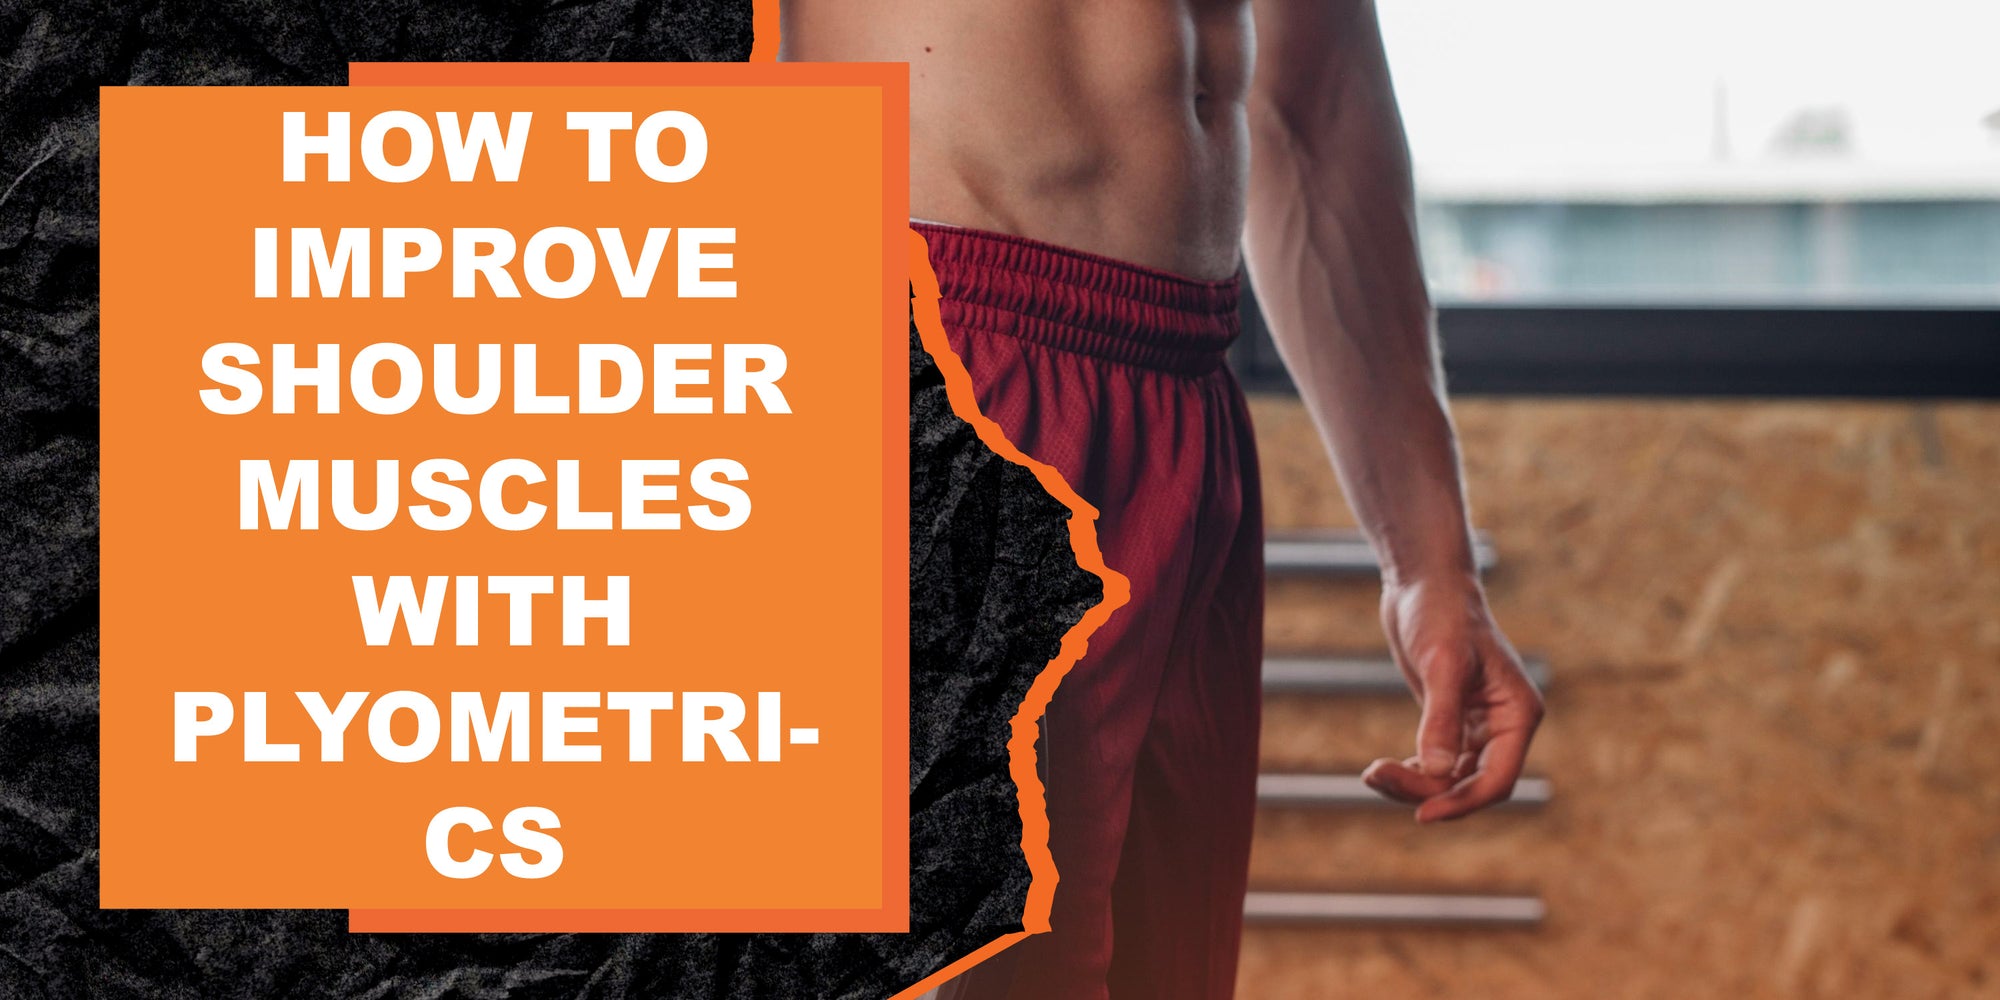 How to Improve Shoulder Muscles with Plyometrics